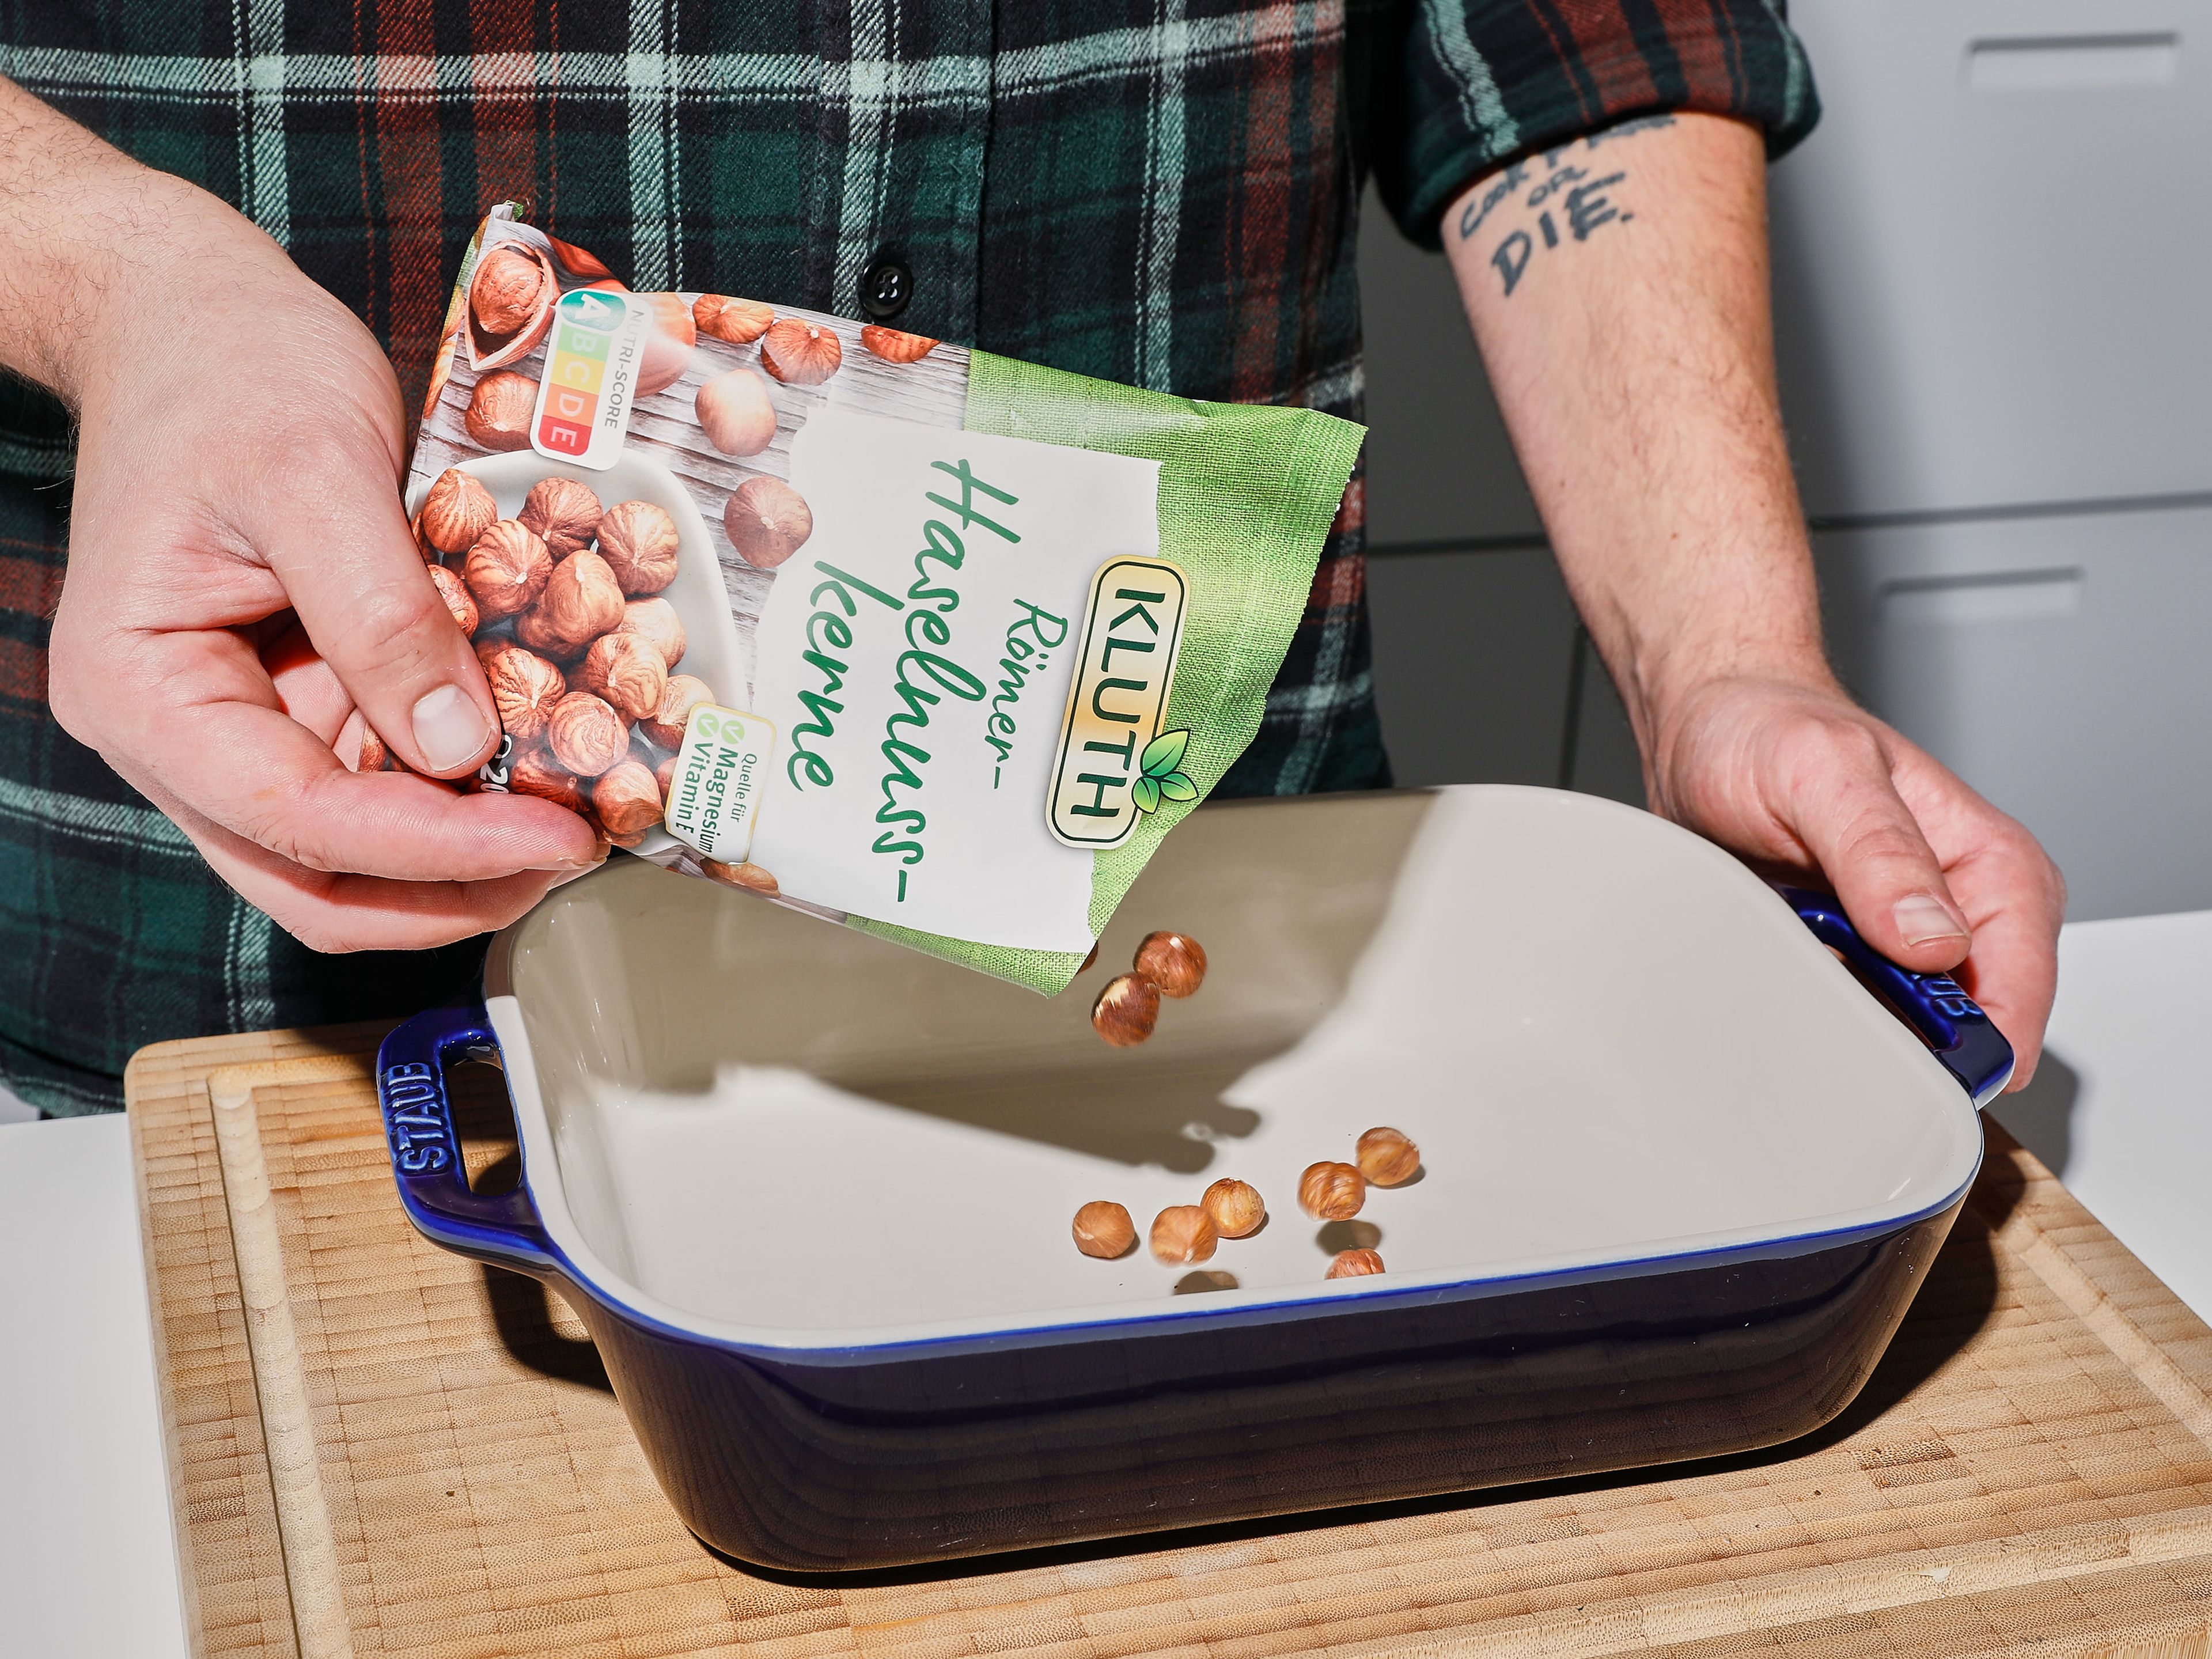 Transfer hazelnuts to a baking sheet and toast at 180°C/350°F for approx. 10 min. Pulse toasted nuts in a food processor until finely ground and mix with the mushroom mixture and thyme leaves. Season with salt and pepper to taste.